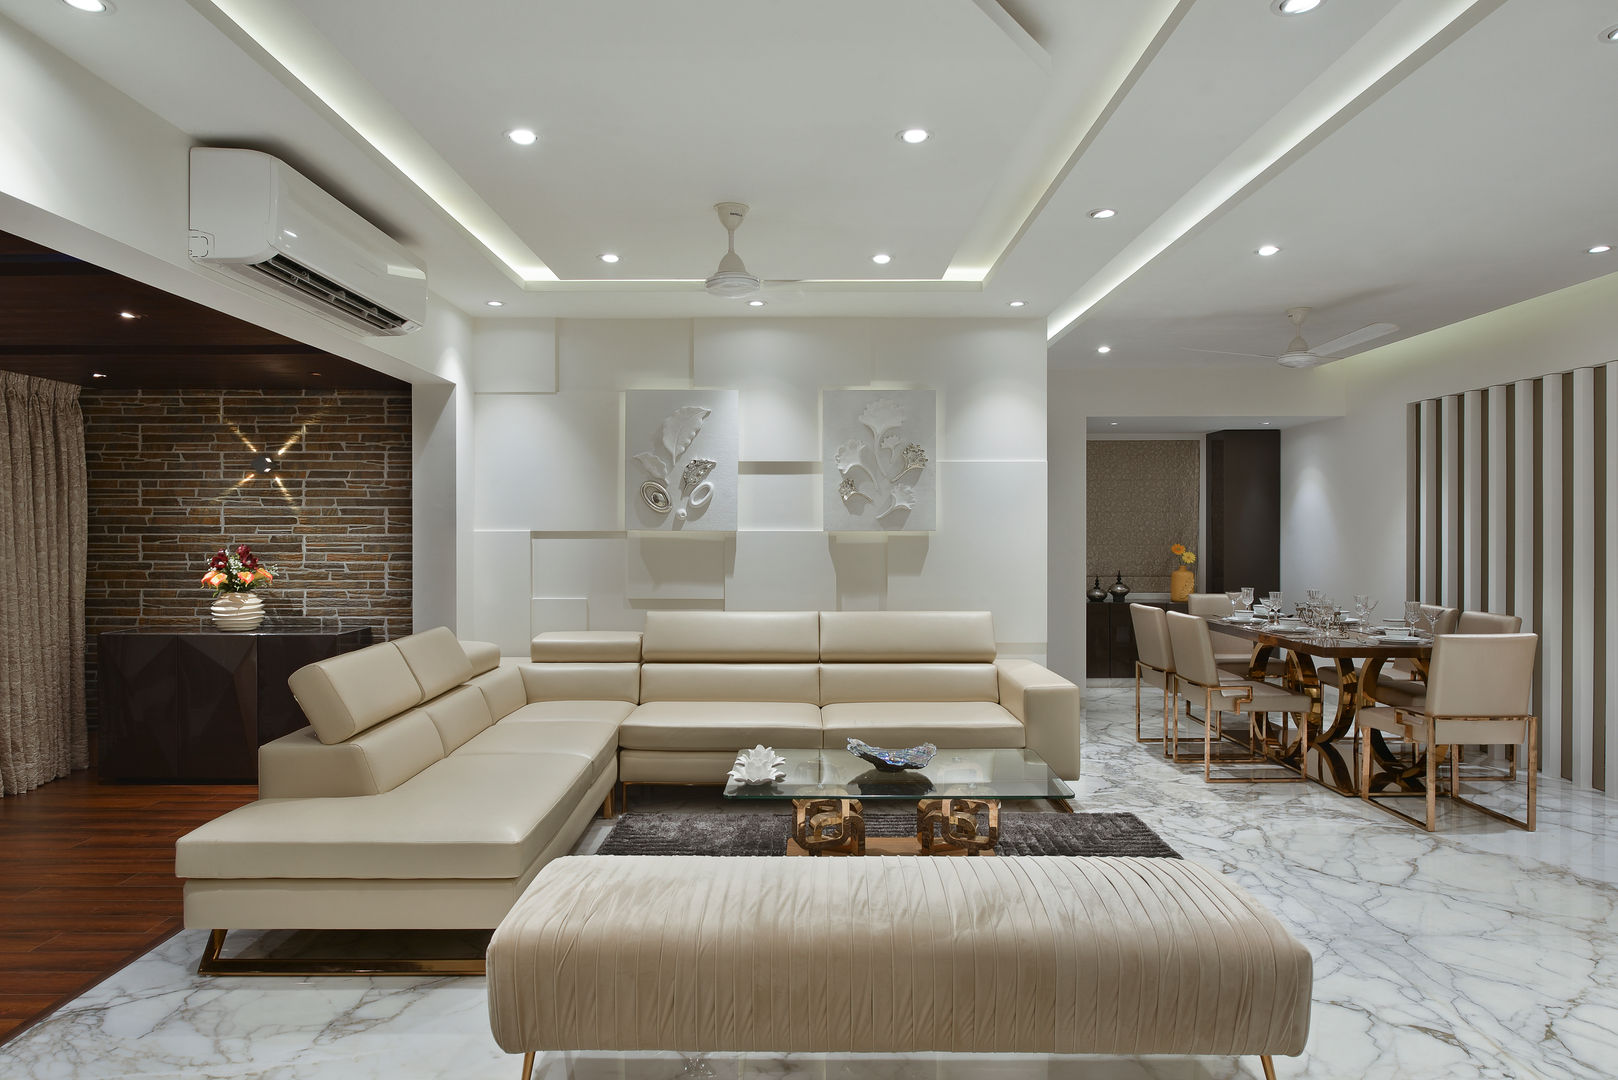 White Haven, Milind Pai - Architects & Interior Designers Milind Pai - Architects & Interior Designers ミニマルデザインの リビング 大理石